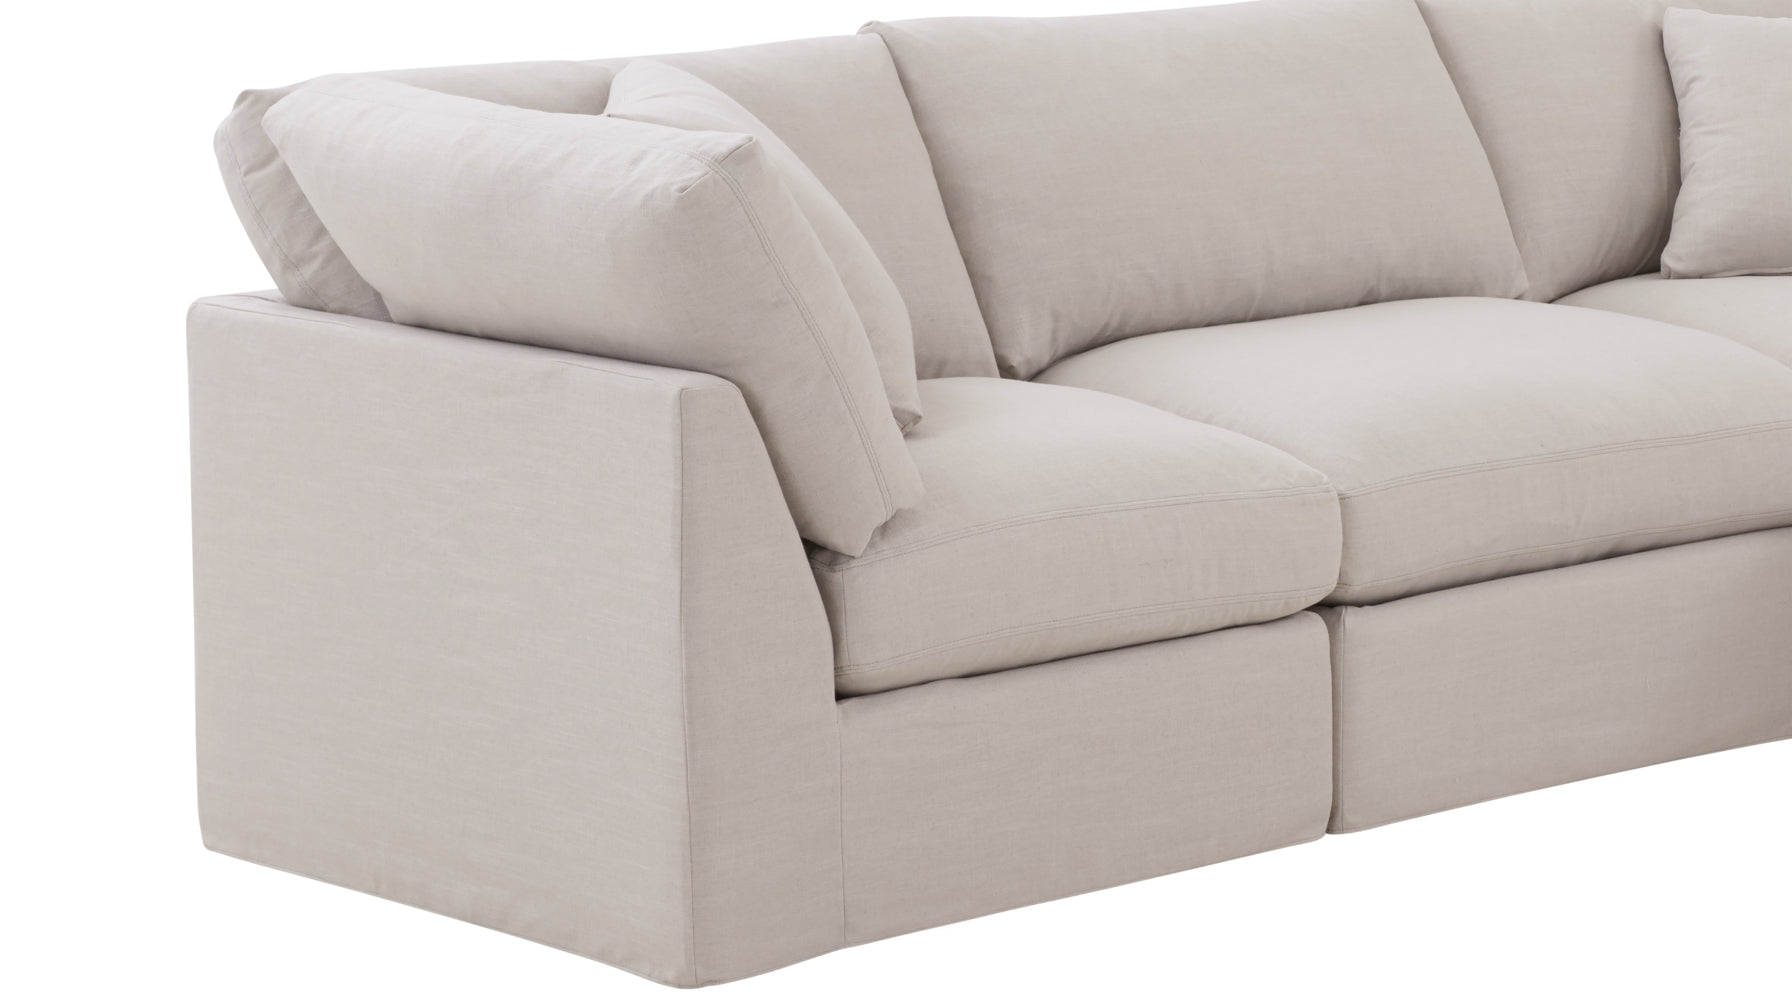 Get Together™ 4-Piece Modular Sectional Closed, Standard, Clay - Image 8